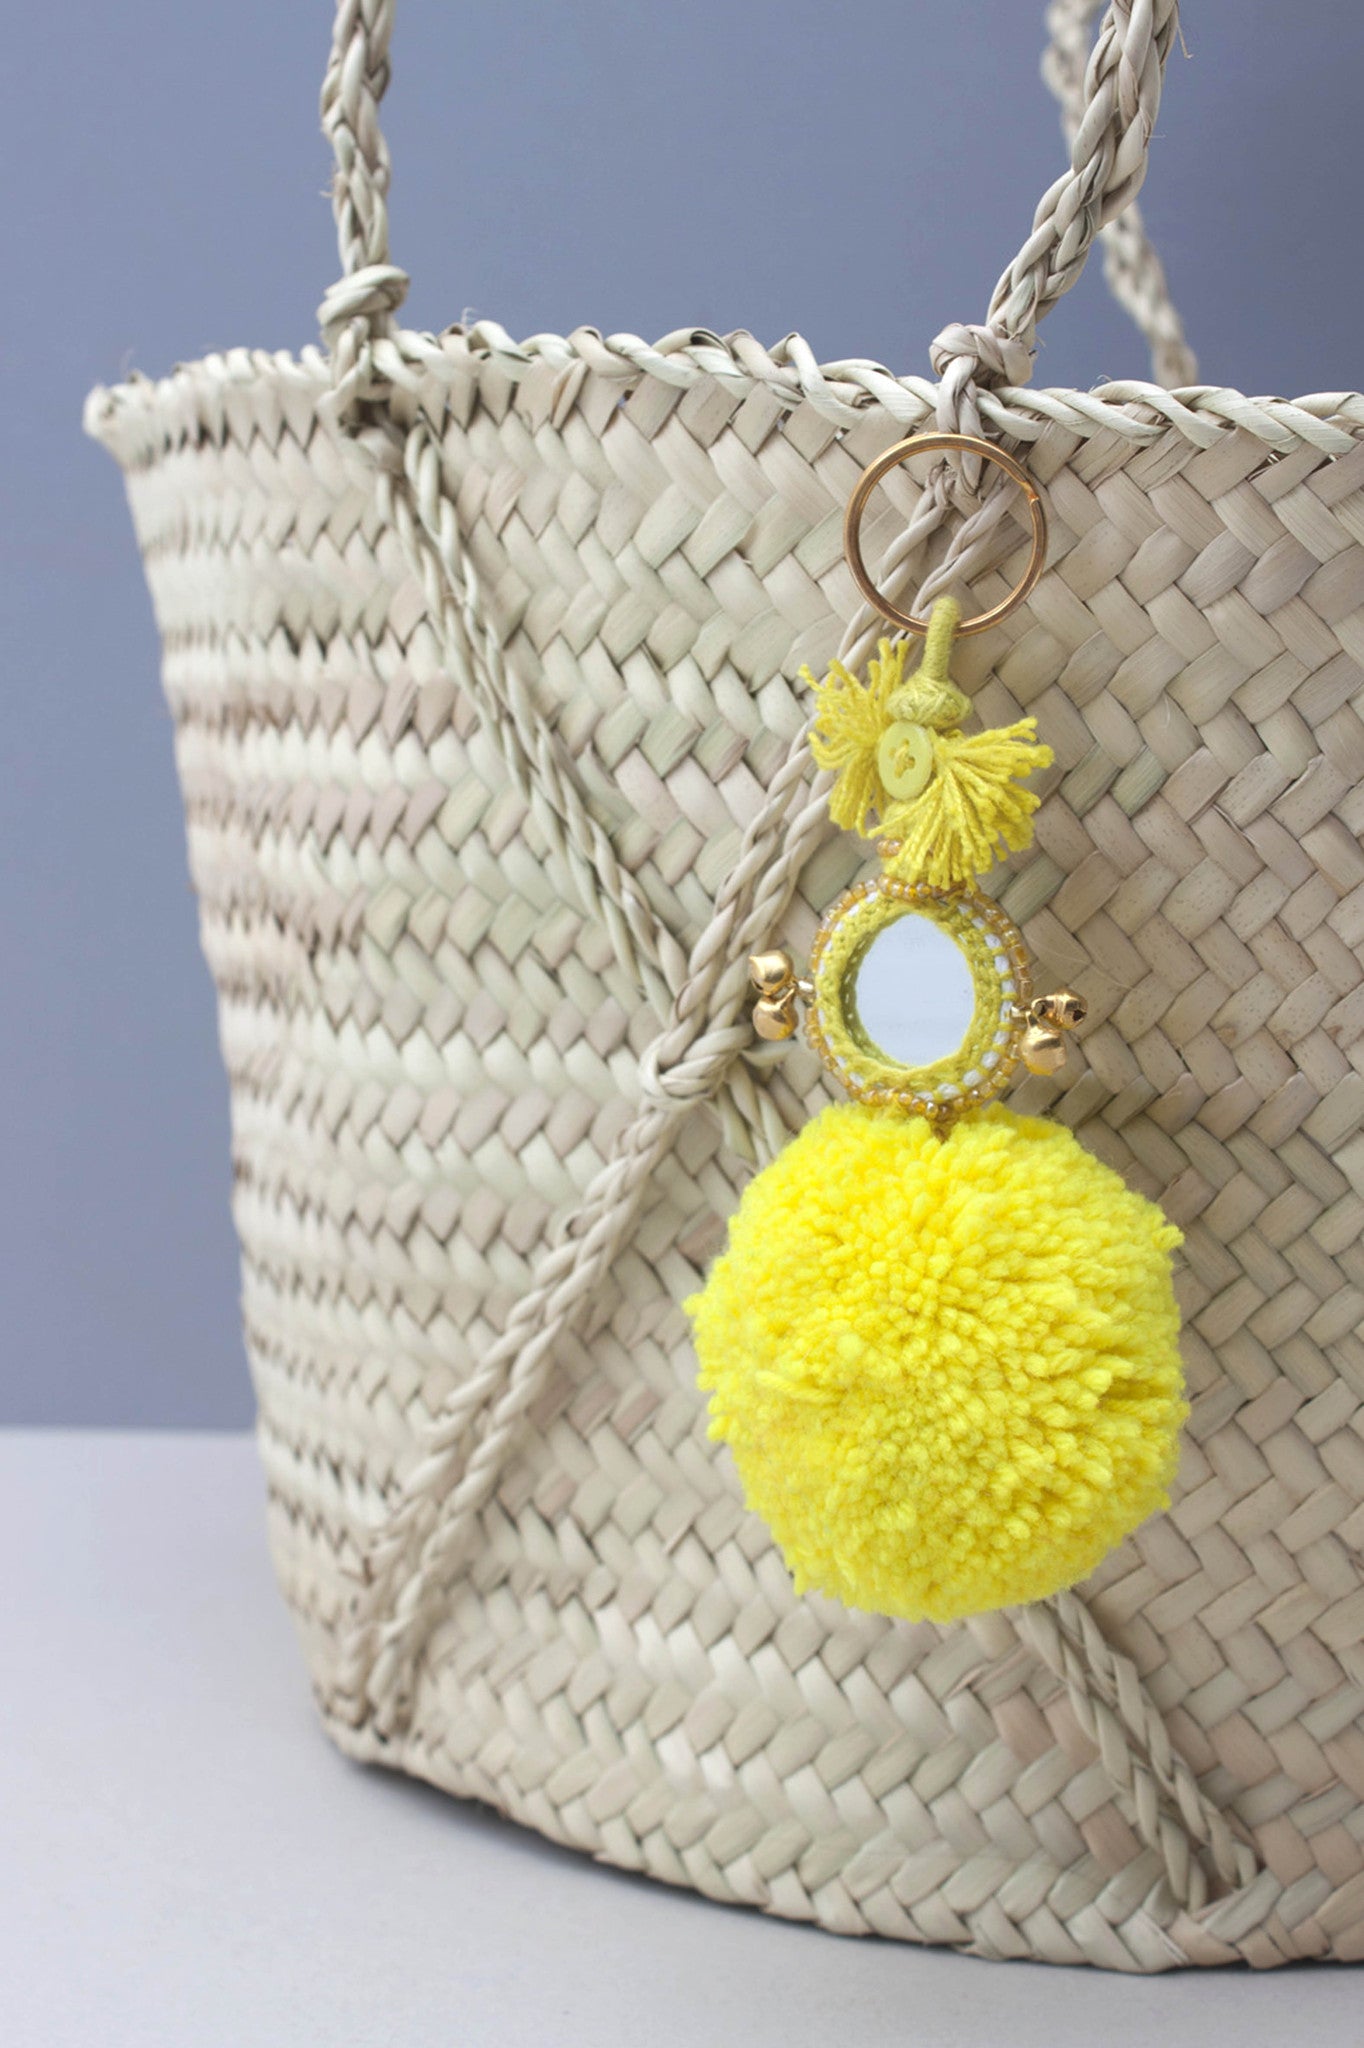 The Pom Pom Mirror Keyring by Bohemia Design is a bright wool pom pom embellished with colorful decorated mirrors, beads and bells -- handmade in India by artisans. This eye-catching pom pom keyring adds a fun twist to your everyday routine. Available in Navy Jade Green Purple Red Yellow Orange Pink Ivory Grey Azure Black  100% Wool Pom Pom Measurements 6" L